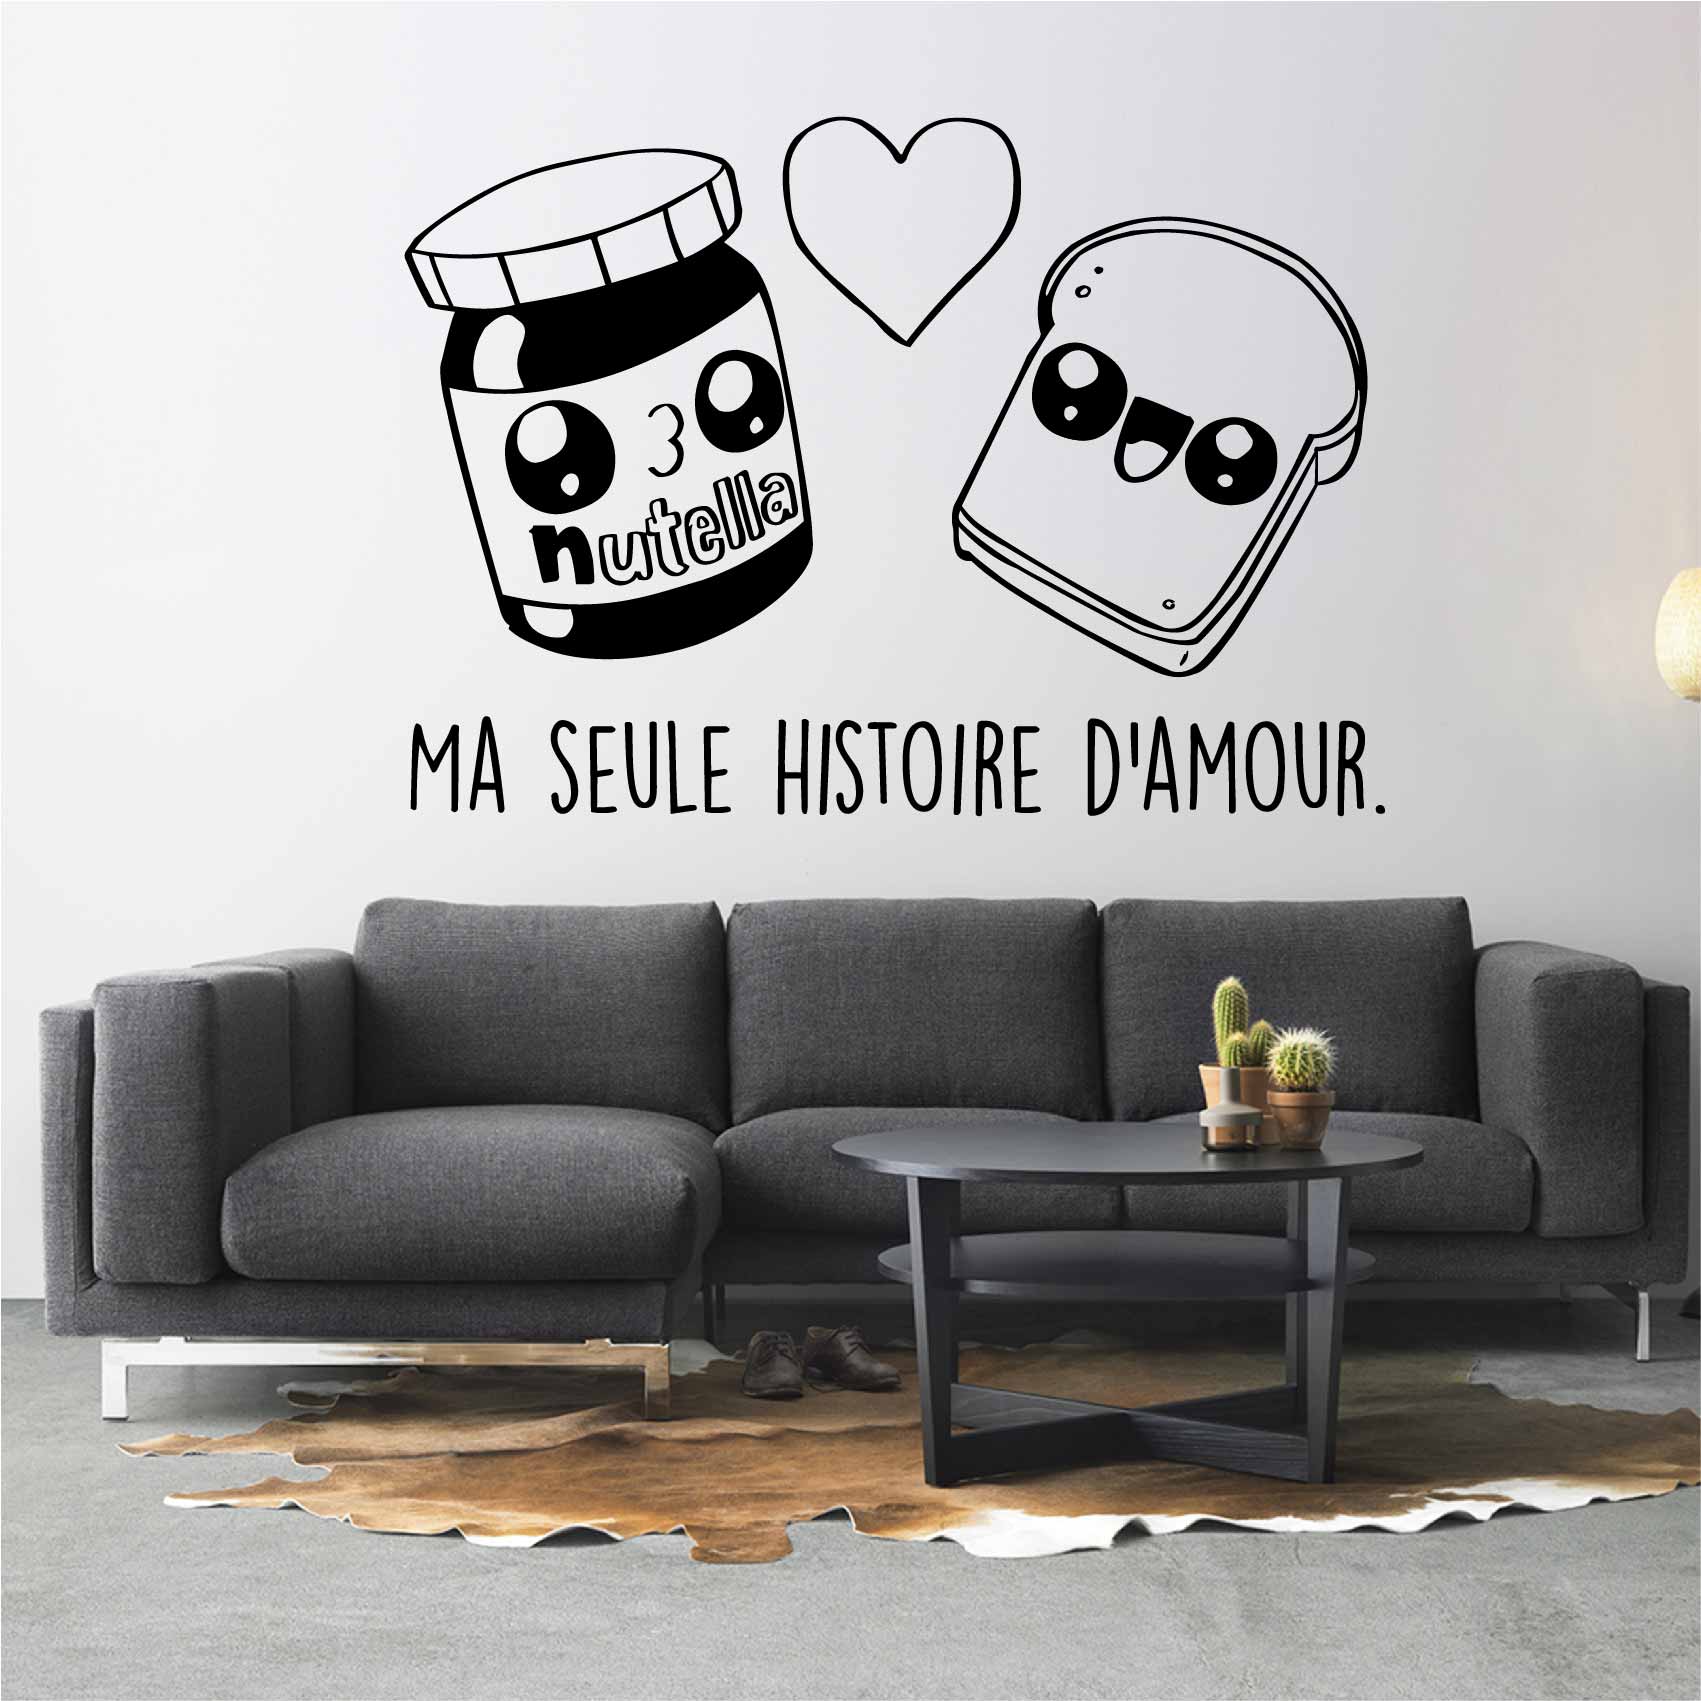 Stickers Kawaii Histoire d'amour Nutella